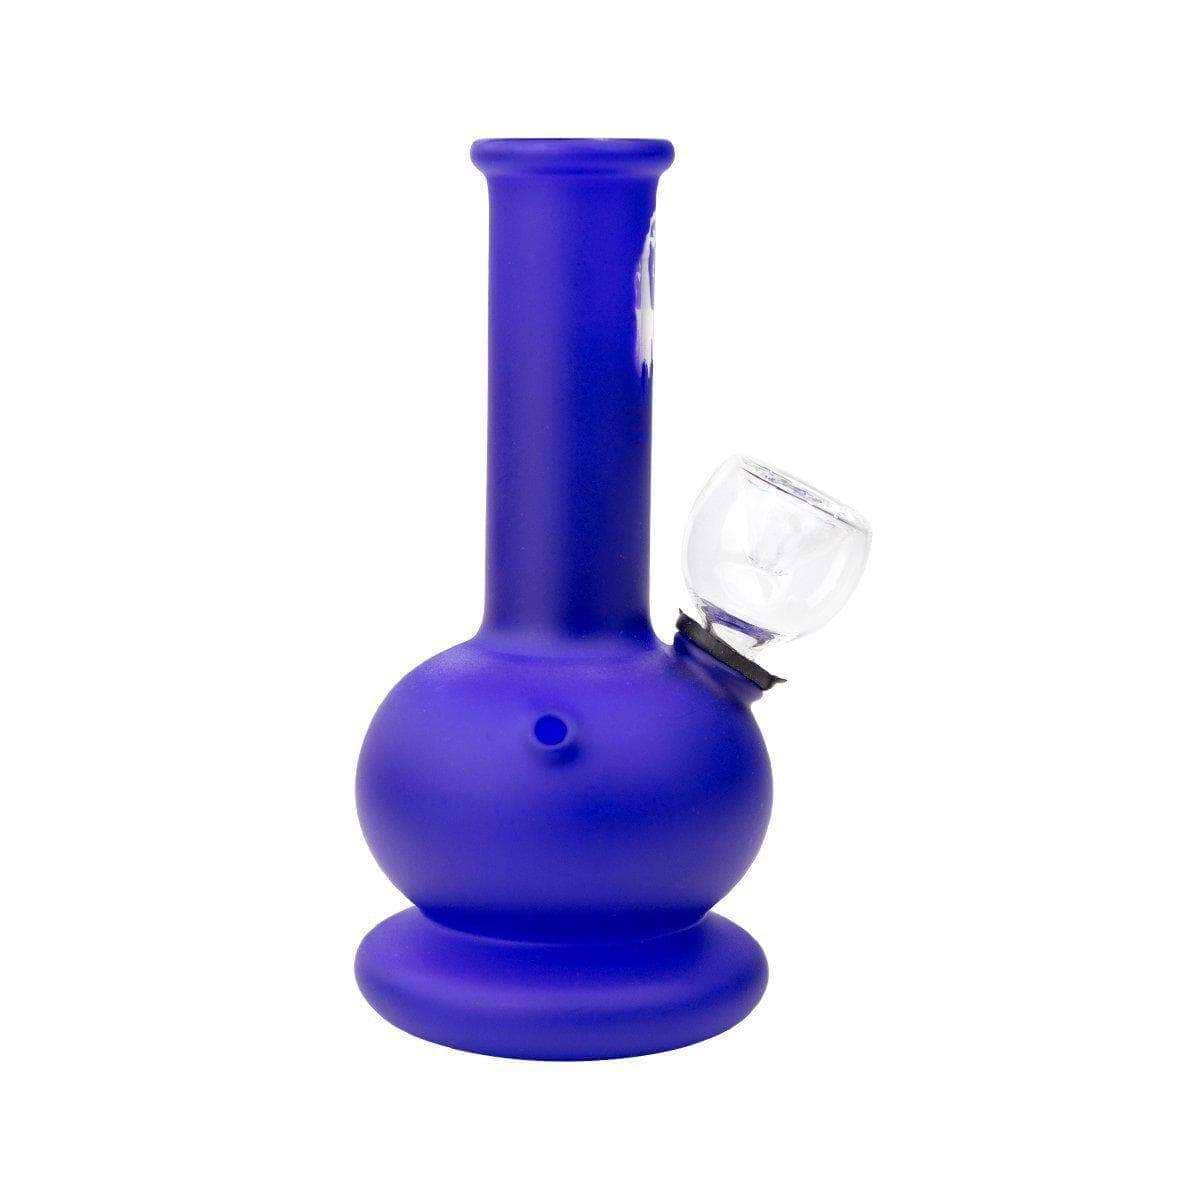 5-inch navy glass carb bong smoking device bright solid color Bob Marley face sillhouette printed on neck